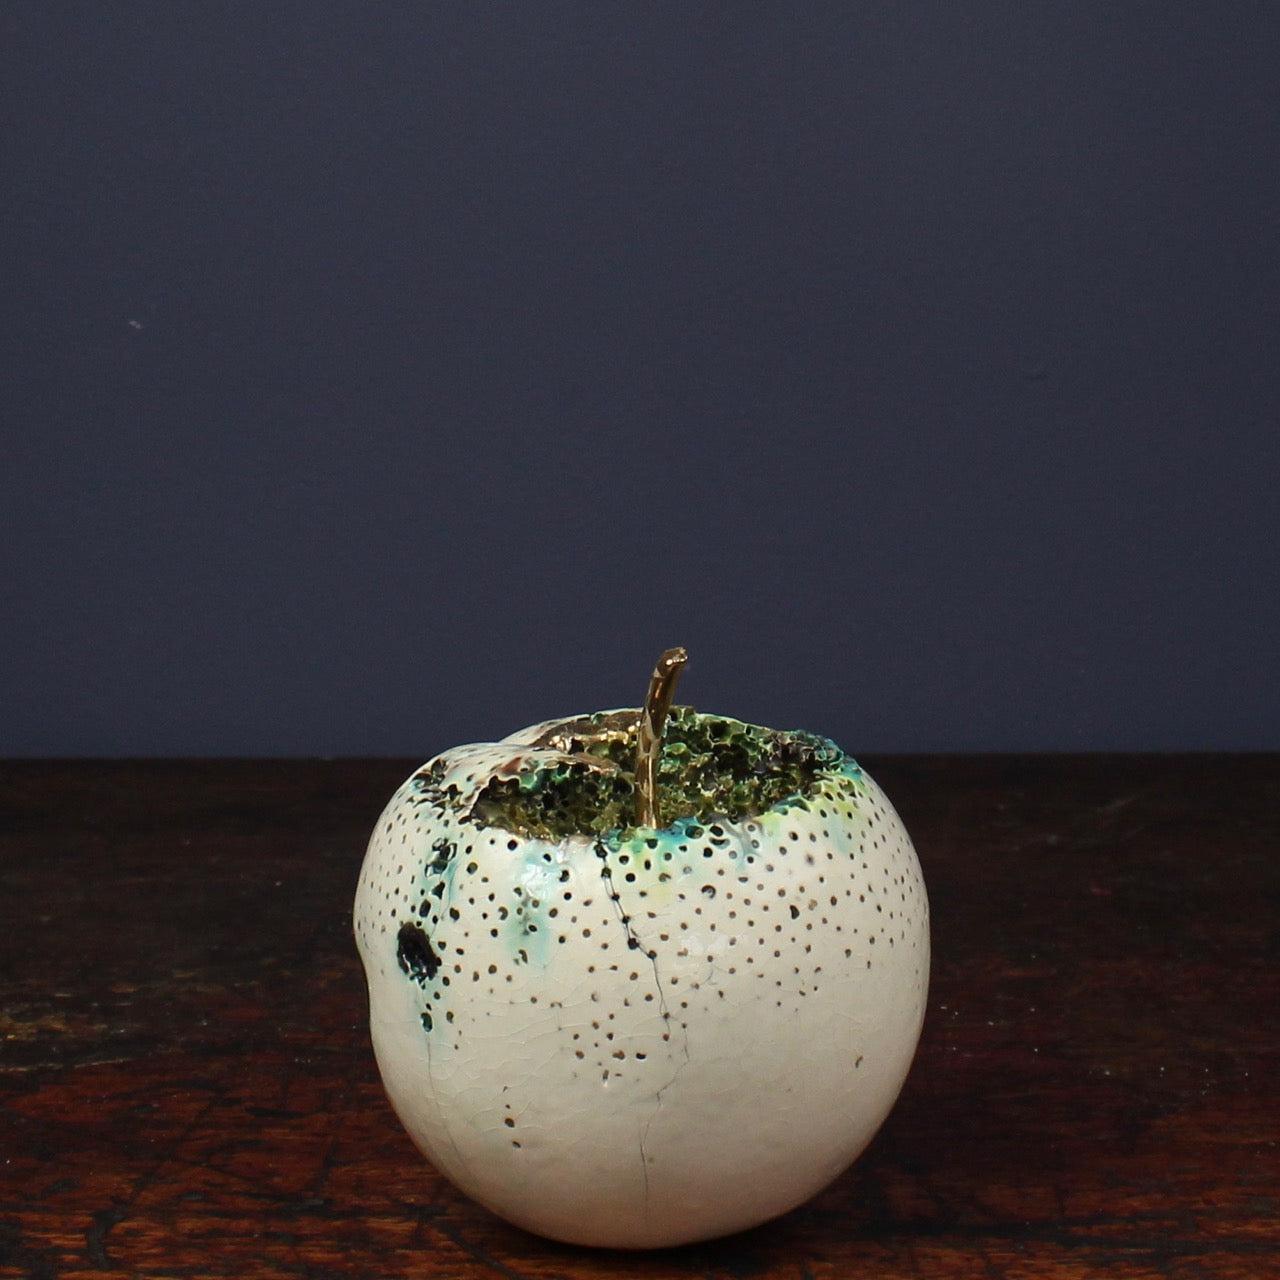 large ceramic white apple with a gold stalk and glaze effects by Remon Jephcott a Cornish based ceramic artist 